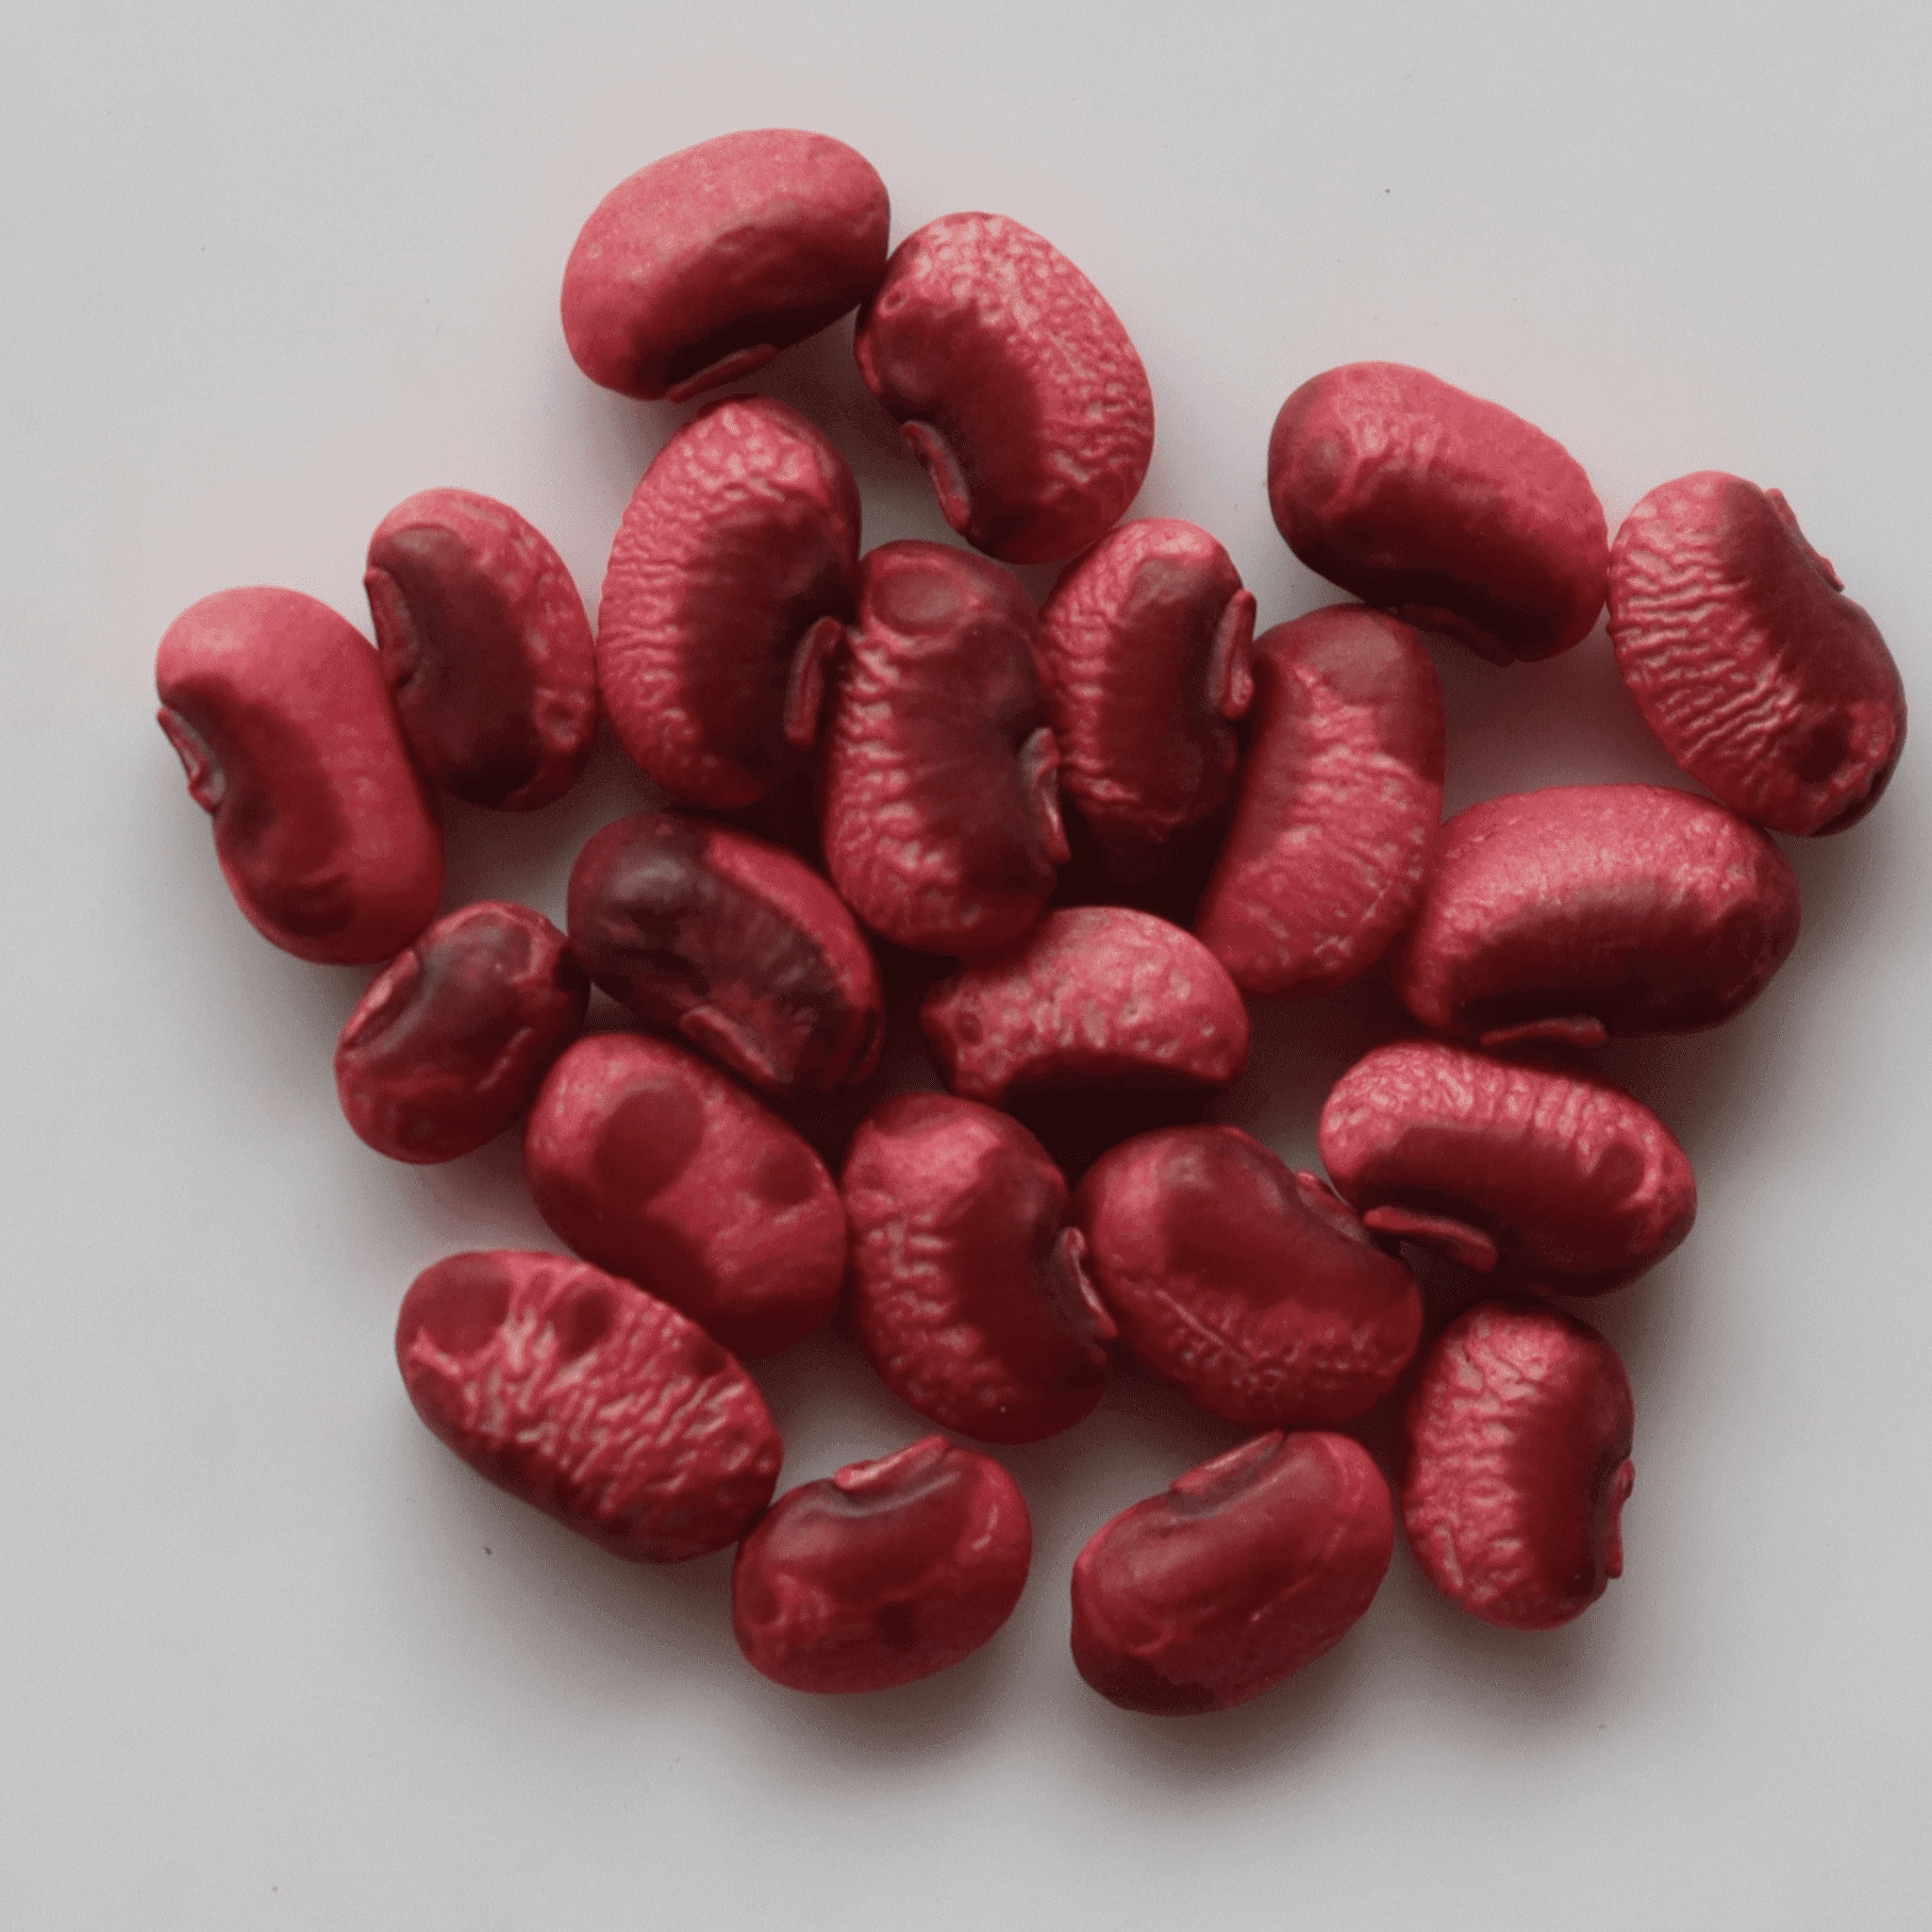 Organic Red Long Beans Seeds - Open Pollinated